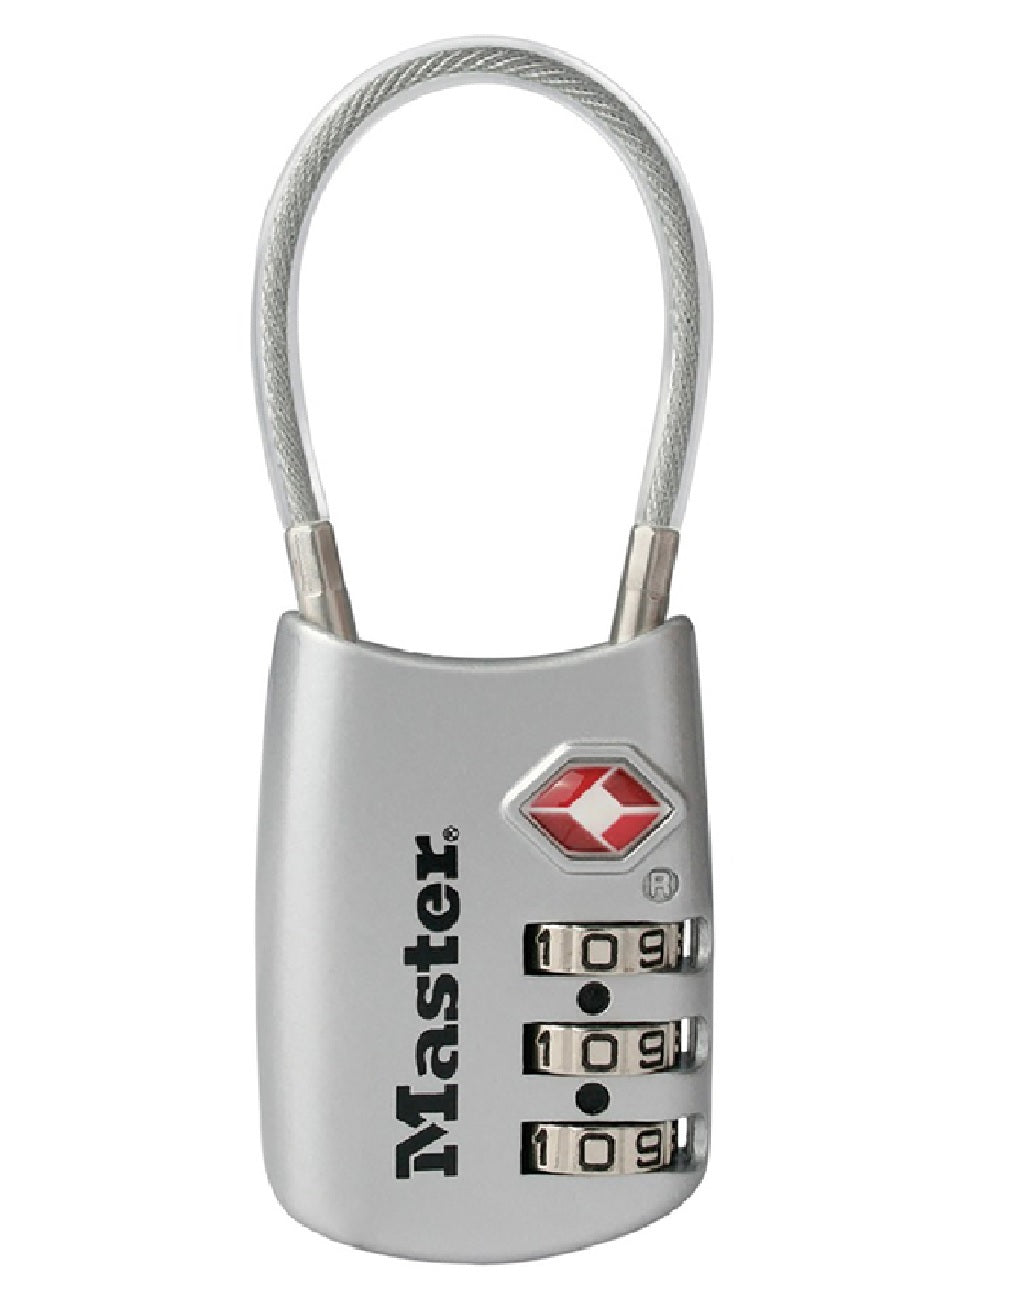 Master Lock 4688D Combination Luggage Lock, Metal, Assorted Colors